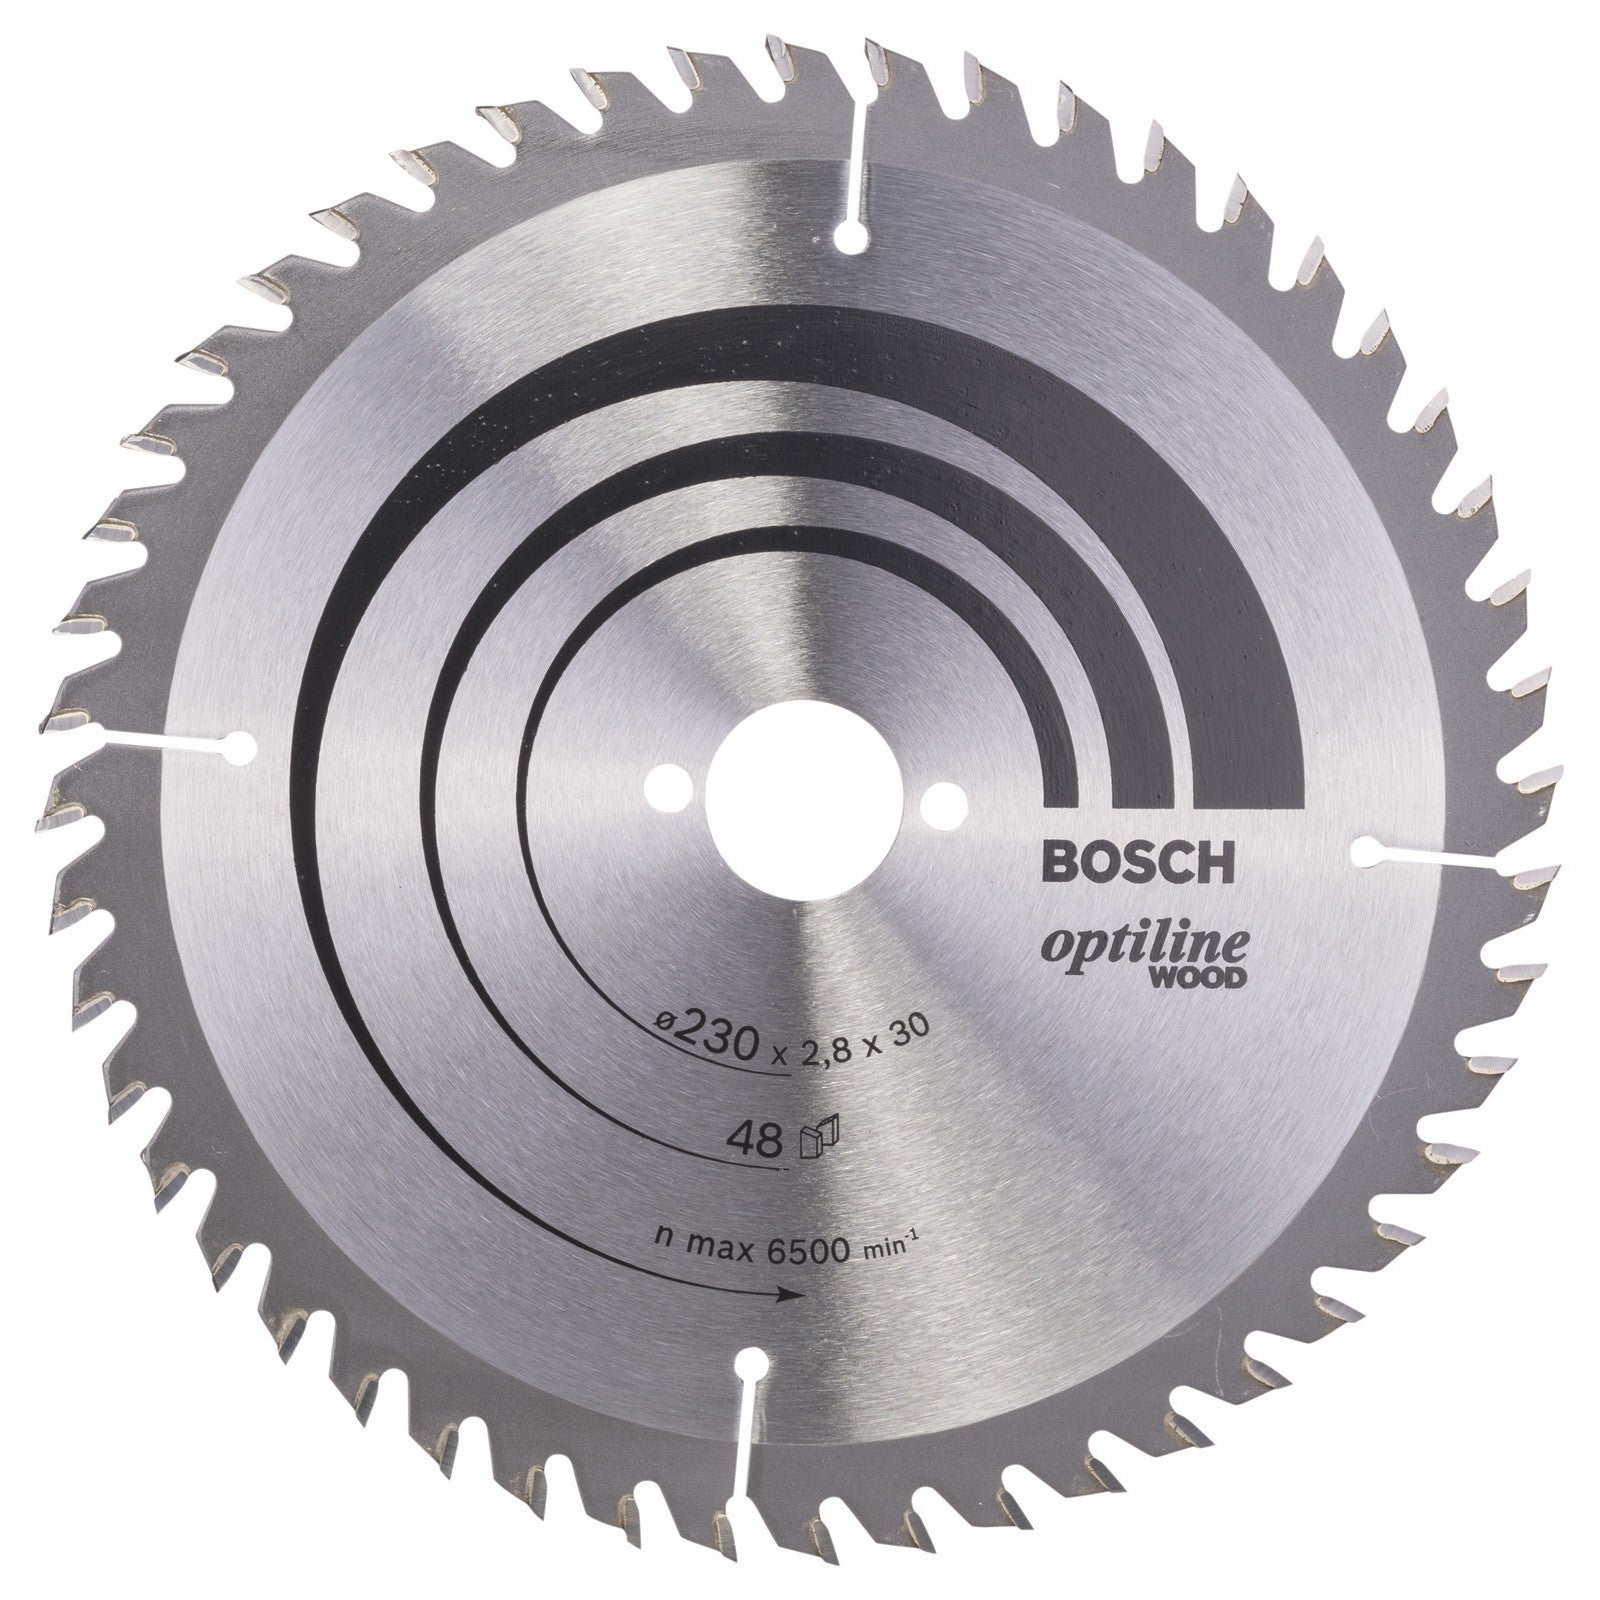 Bosch Optiline Circuular Saw Blade for Wood 230 x 30 x 2,8 mm, 48 2608640629 Power Tool Services